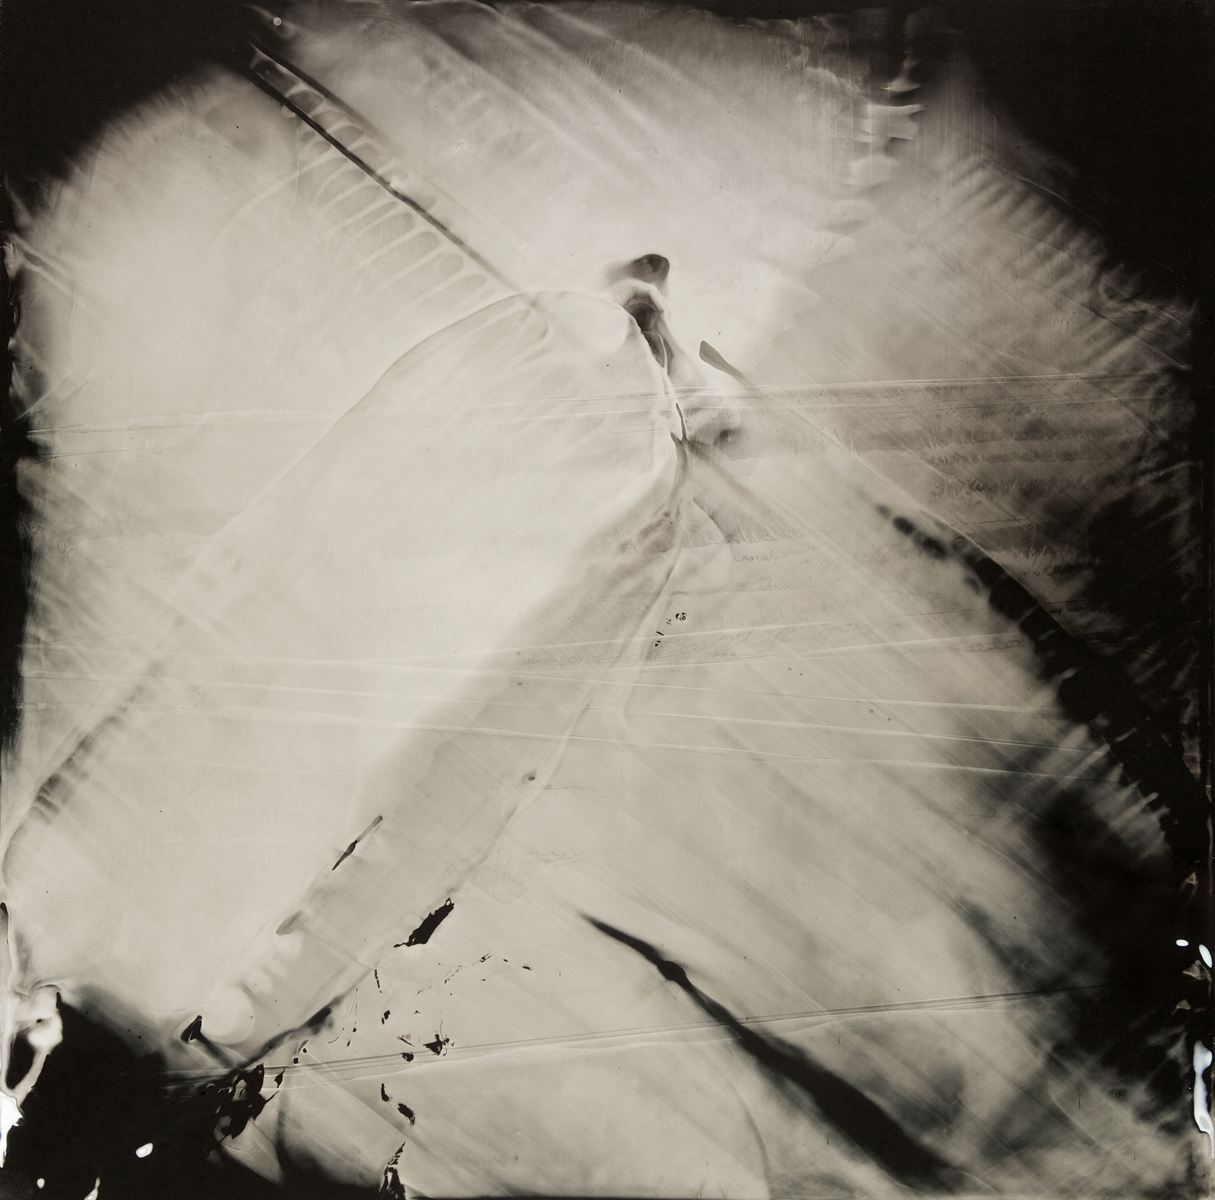 9:28 PM, April 9, 2015. Collodion tintype, 14x14 inches.